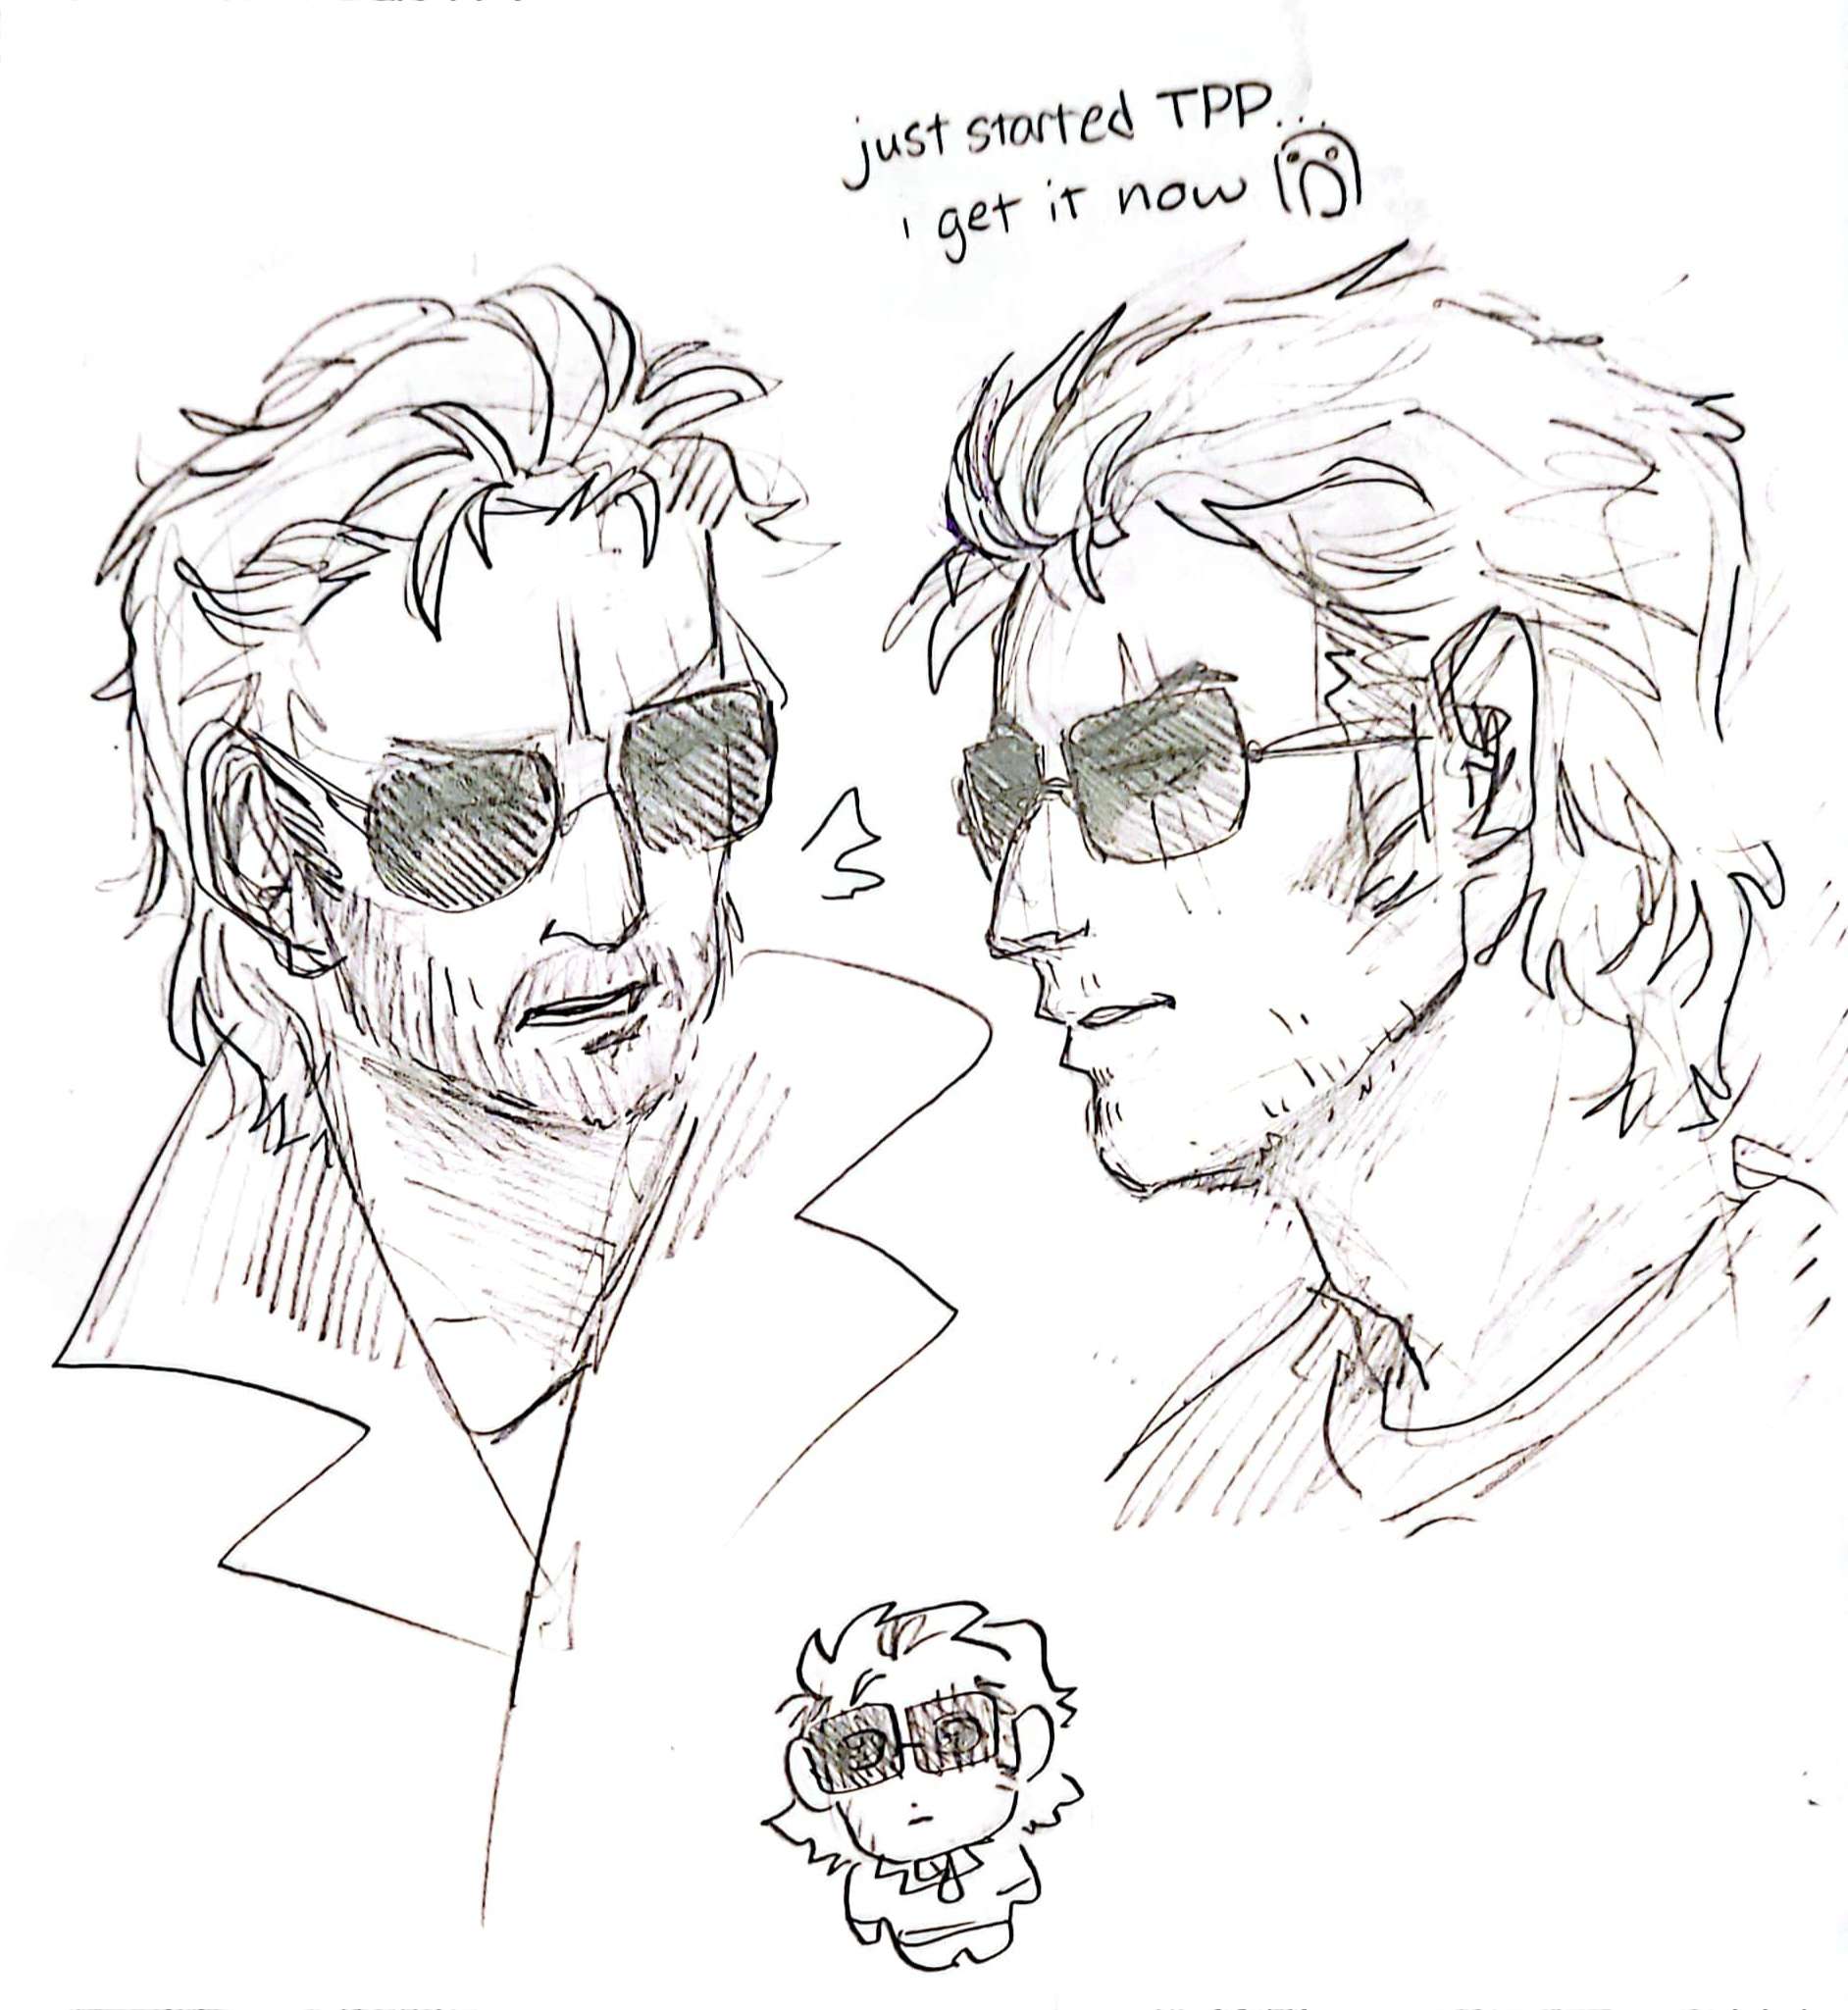 Two sketches of GZ and PW Kaz portraits, below is a tiny pathetic doodle of his PW design